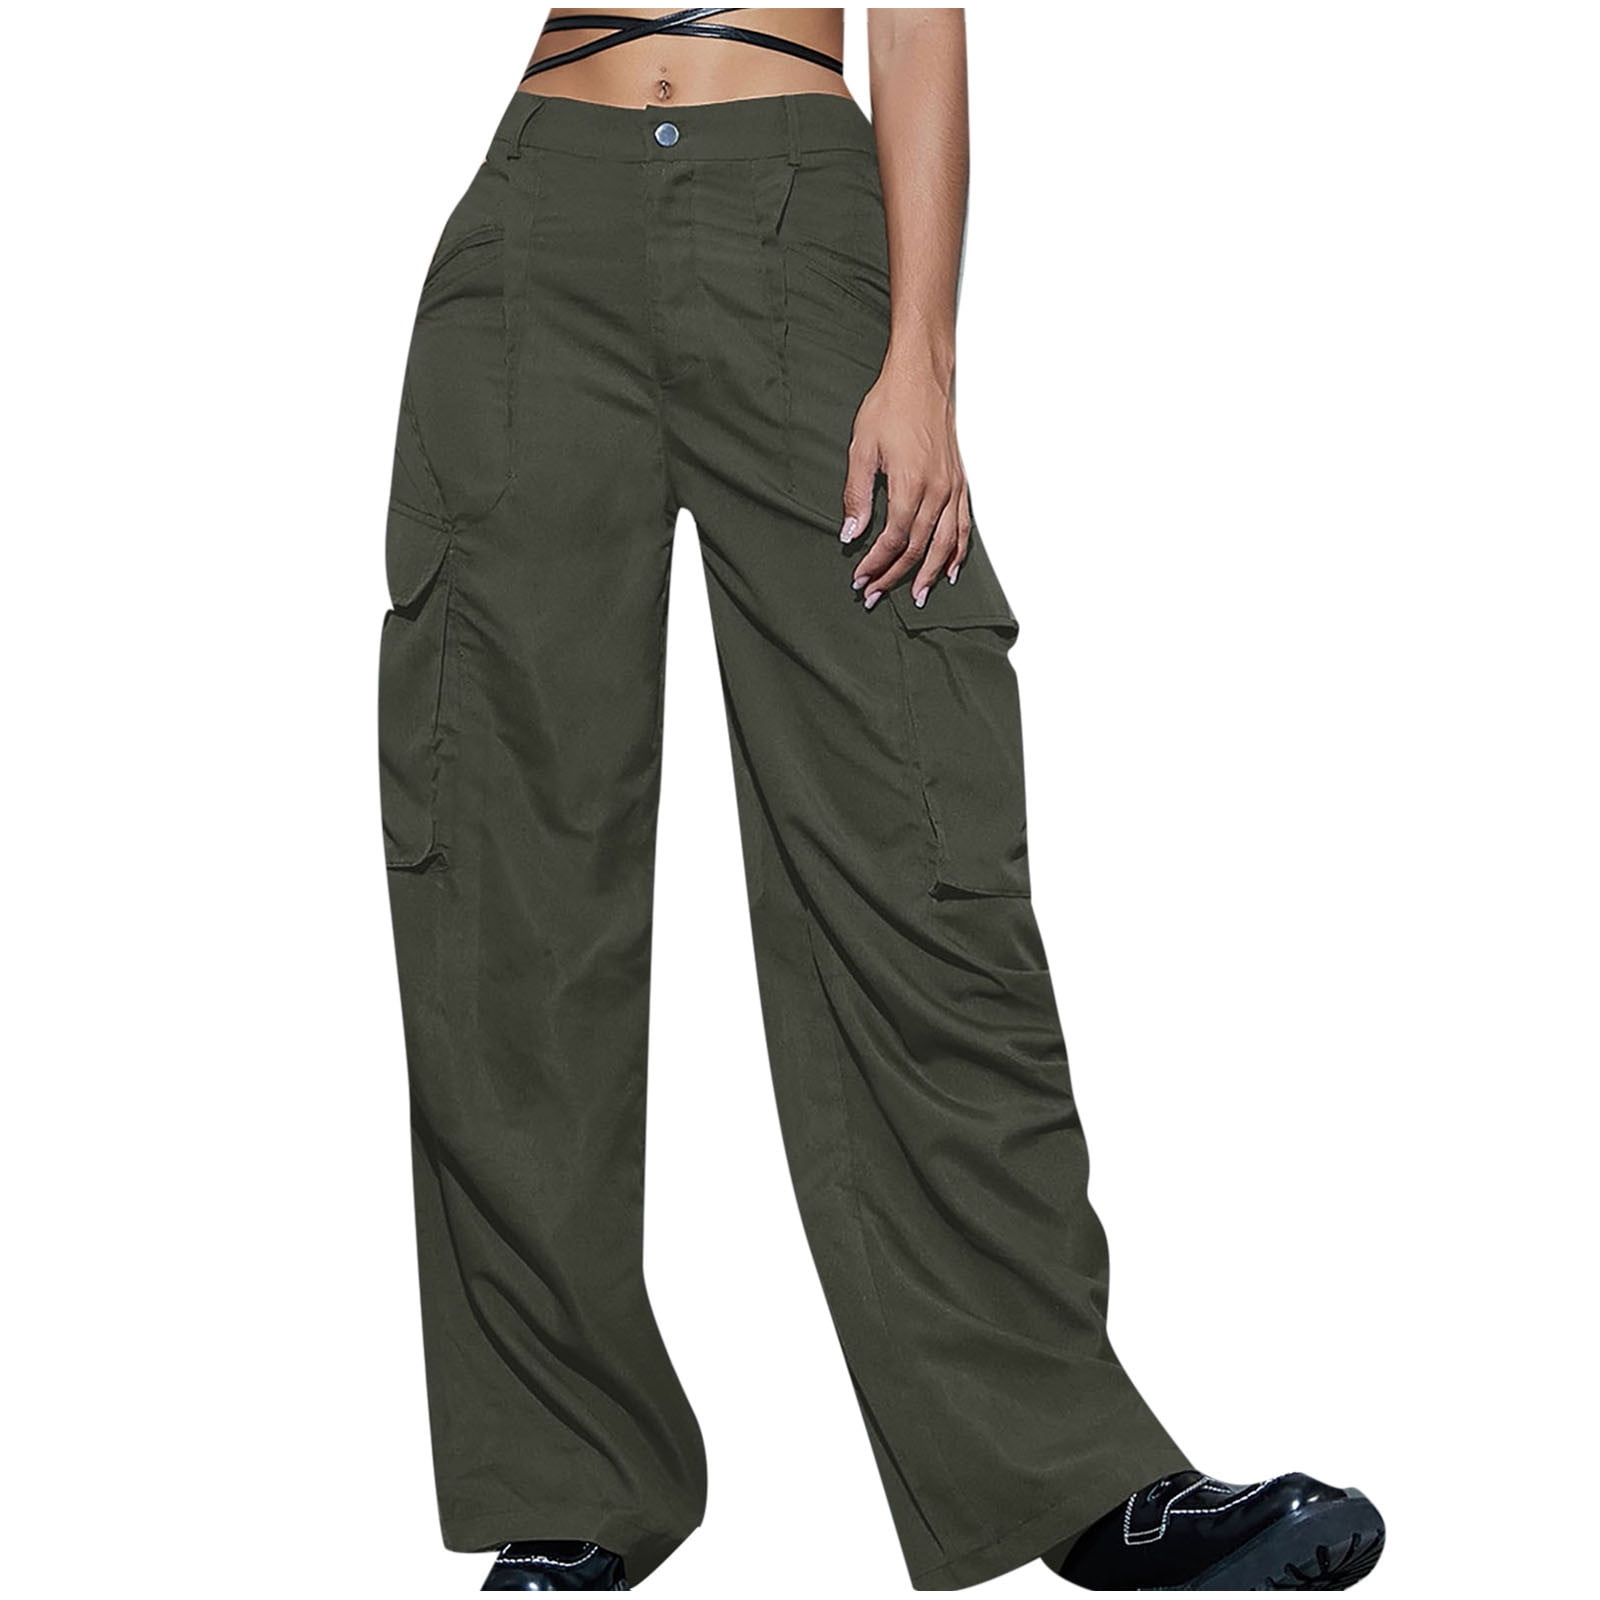 YWDJ Womens Black Cargo Pants Y2K With Pockets Low Rise Workout